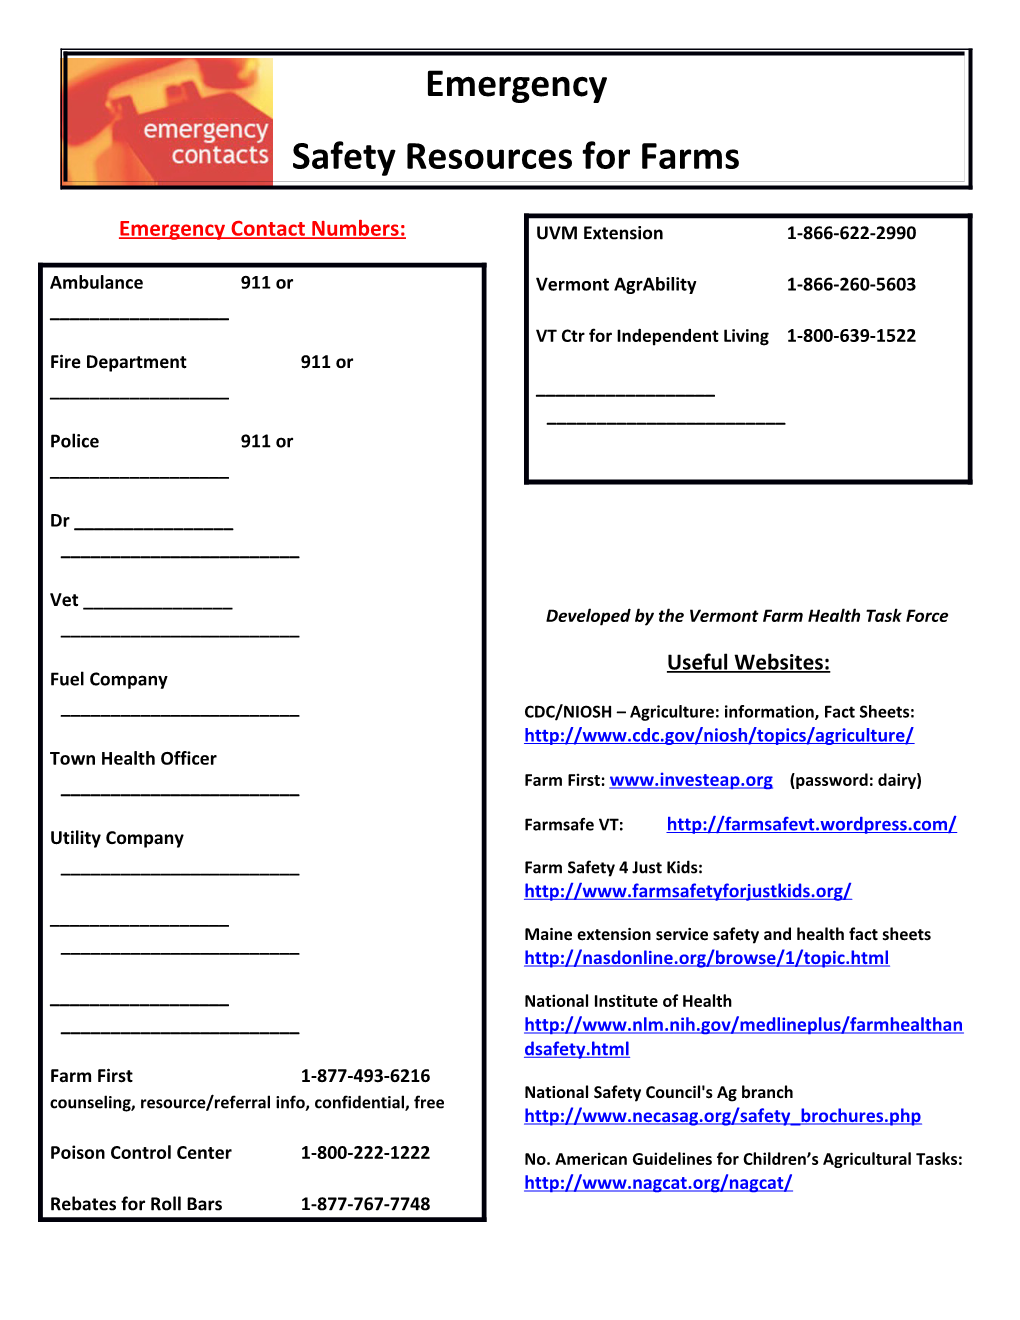 Safety Resources for Farms